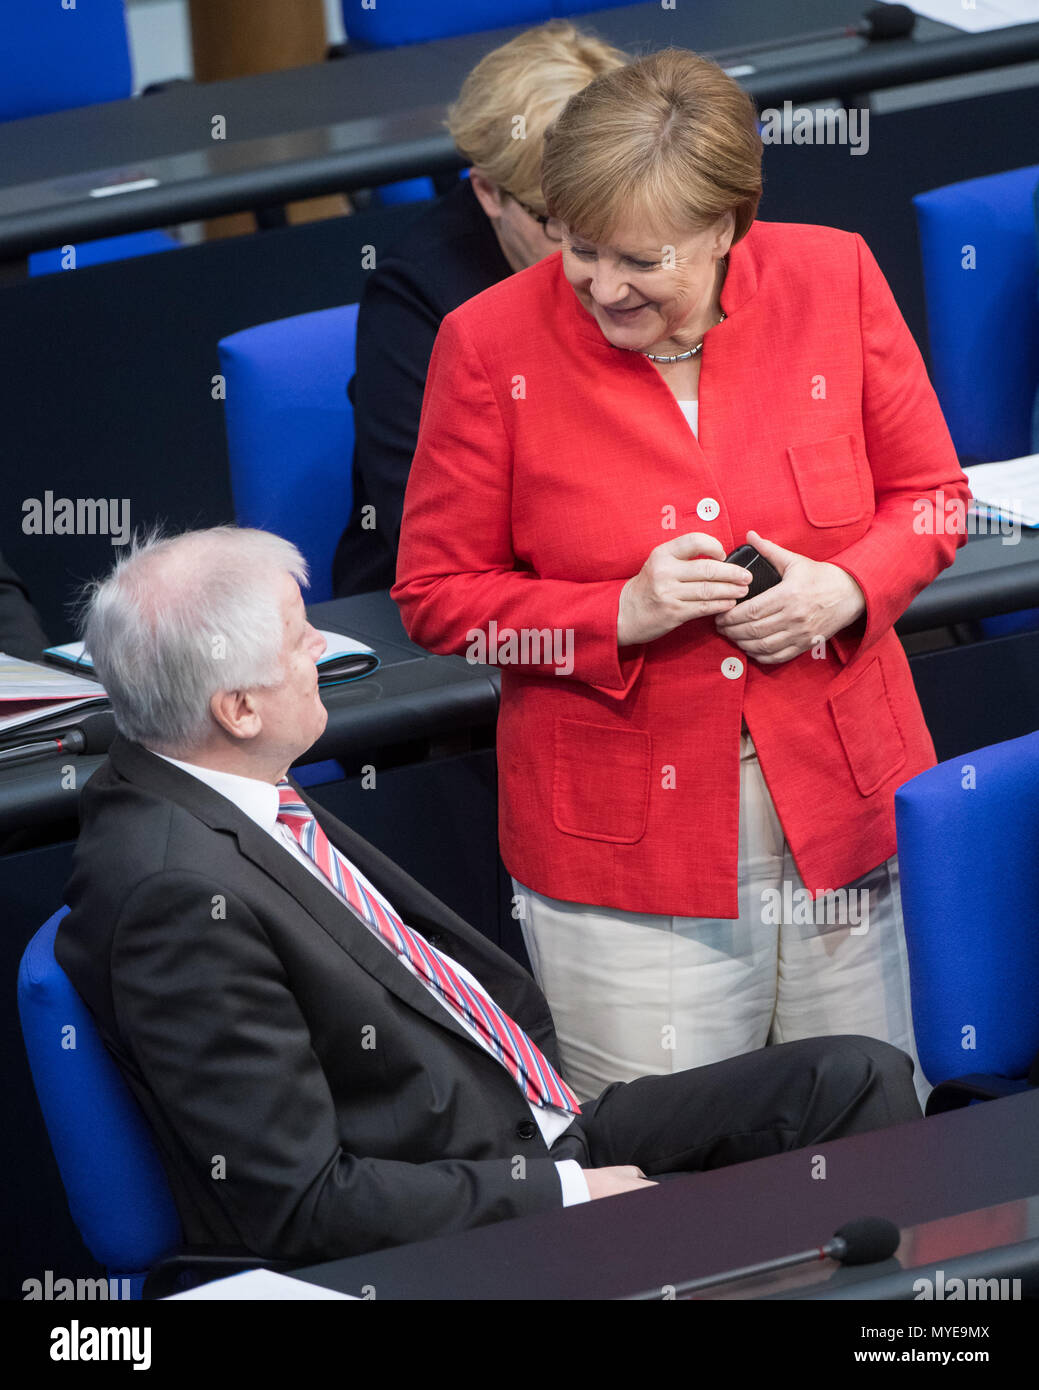 Berlin, Germany. 7th June, 2018. German chancellor Angela Merkel (Christian Democratic Union) speaks with Horst Seehofer of the Christian Social Union (CSU), federal interior minister, during a plenary meeting of the German parliament at the Reichstag building. Main themes of the 36th session of the 19th legislature period include new refugee family reunion laws, foreign deployments of the German army, rising rent prices in Germany as well as a committee of inquiry requested by the Free Democratic Party concerning the Federal Office for Migration and Refugees (BAMF) affair. Photo: Bernd von Ju Stock Photo